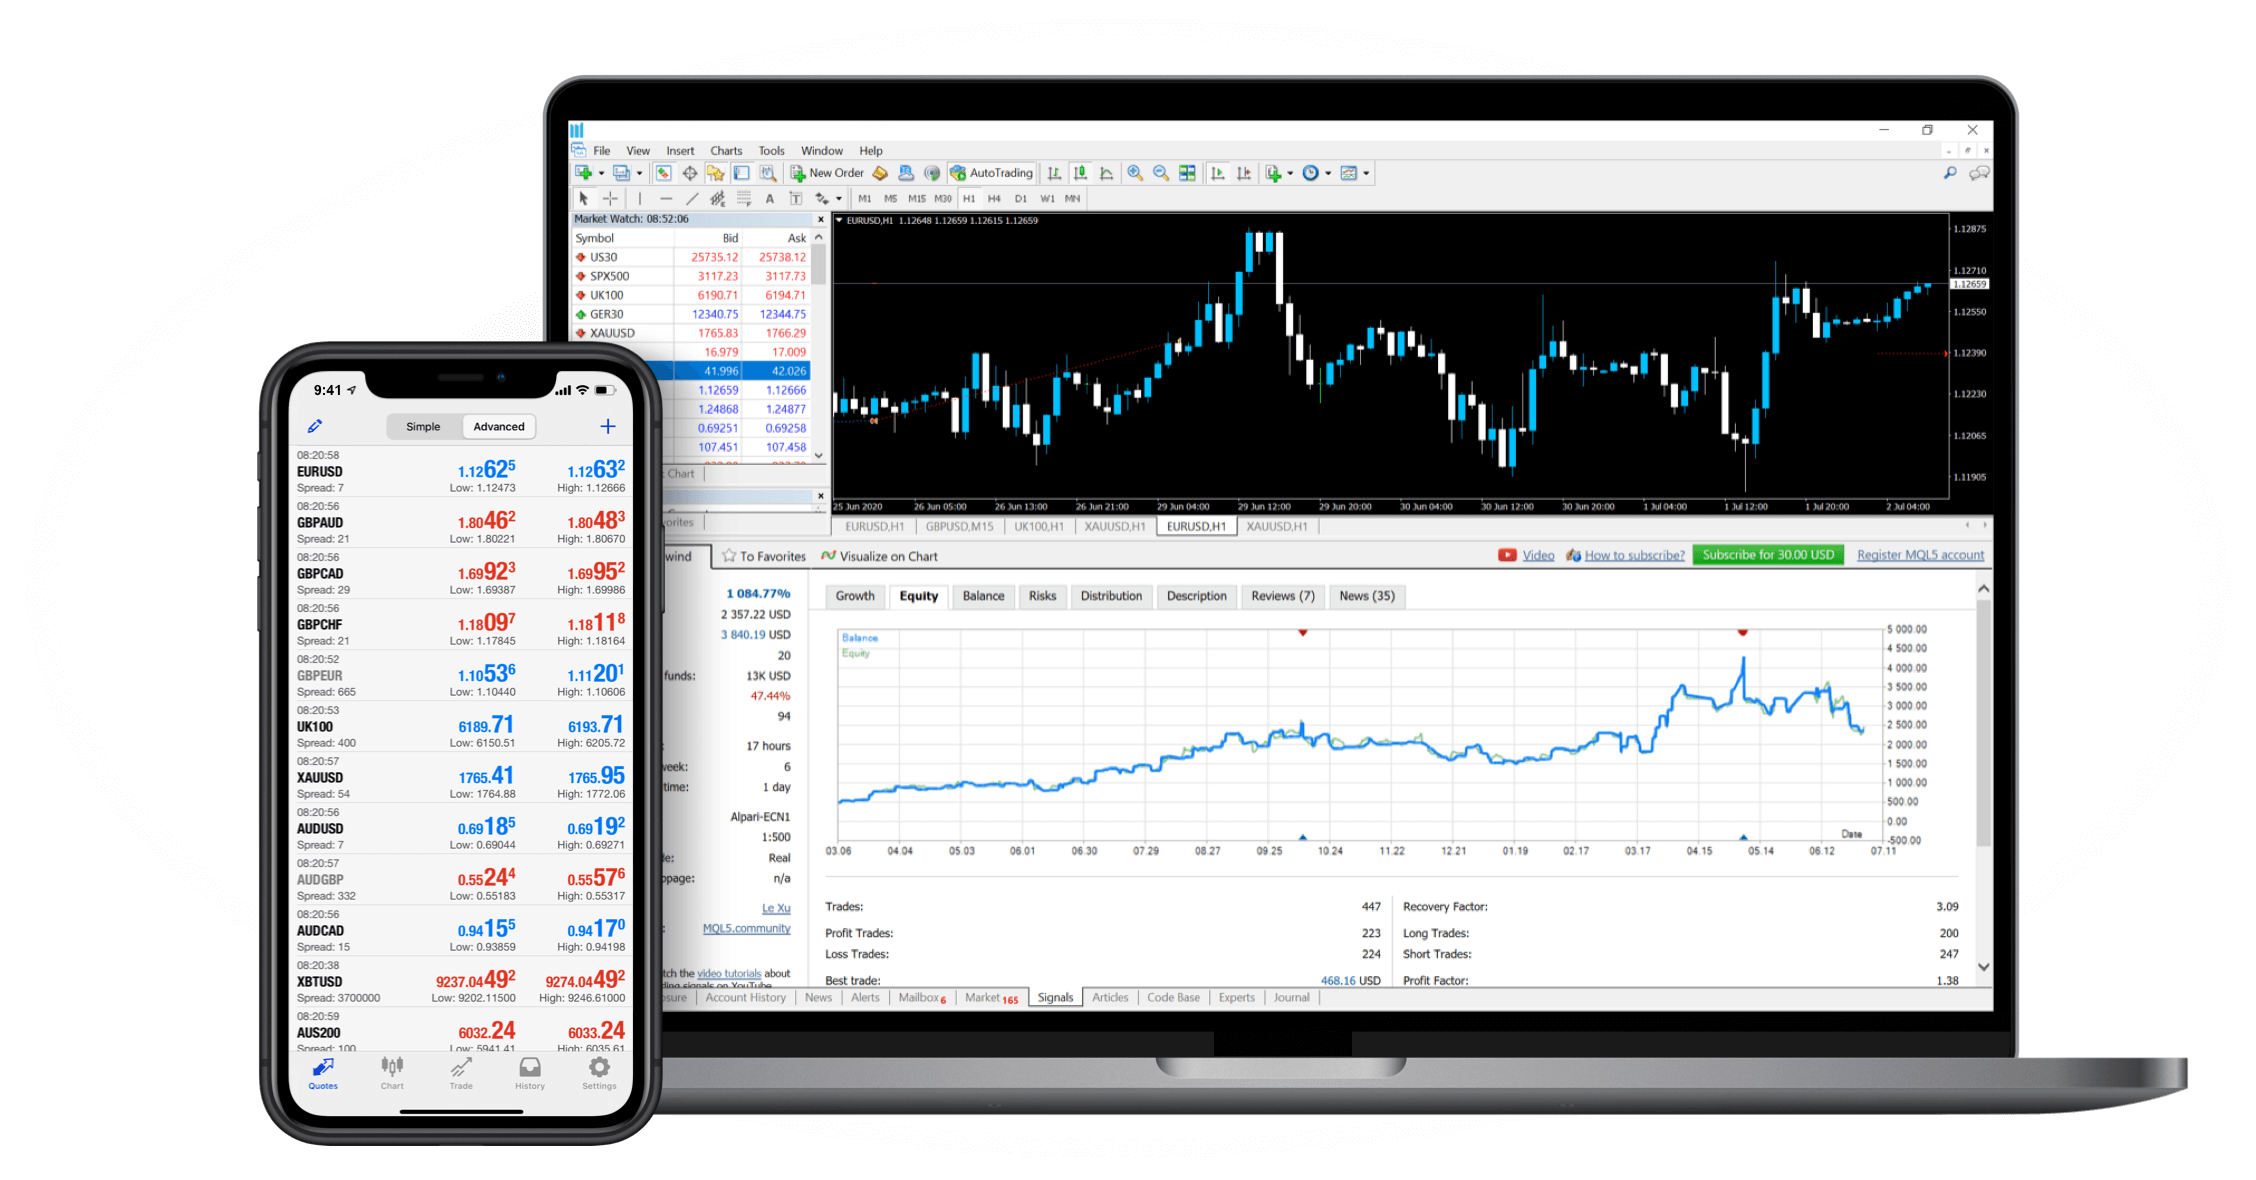 Top Of The Line Tools and Add-ons Used In MetaTrader 5